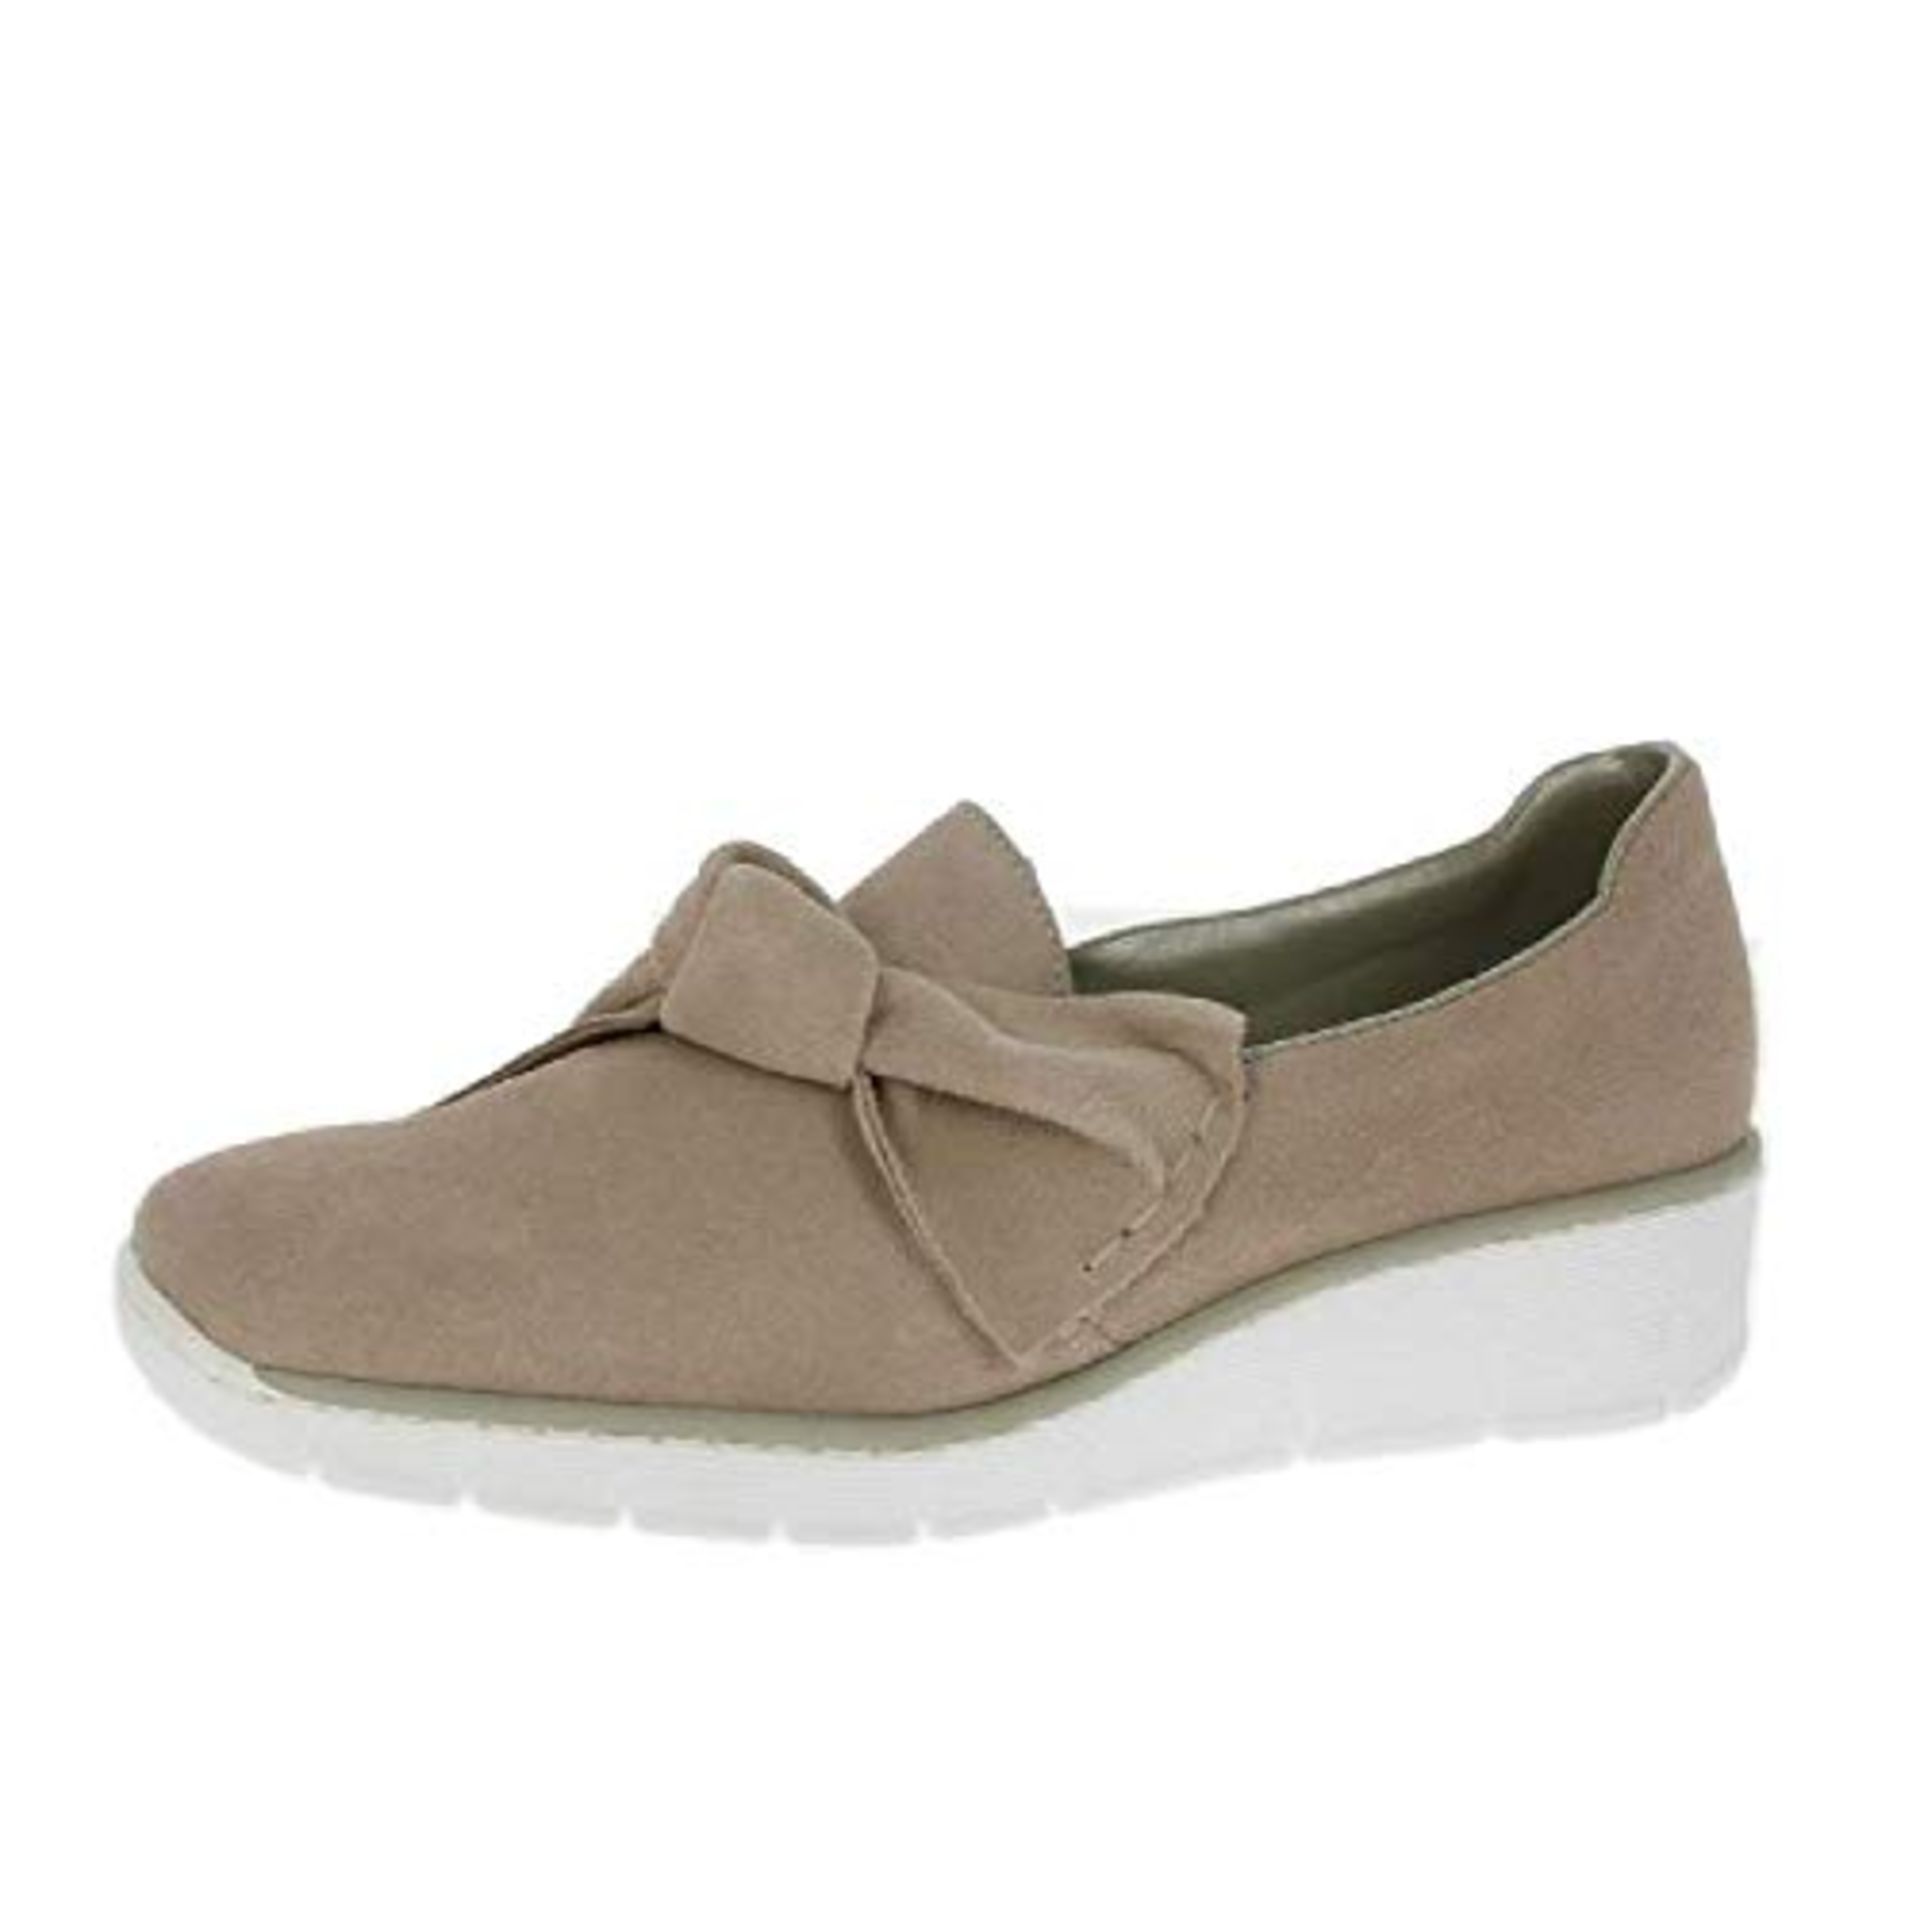 Rieker 537Q4 Suede Leather Loafer Shoes Low Wedge Rosa 5 UK 5 UK Women’s |4059954976806